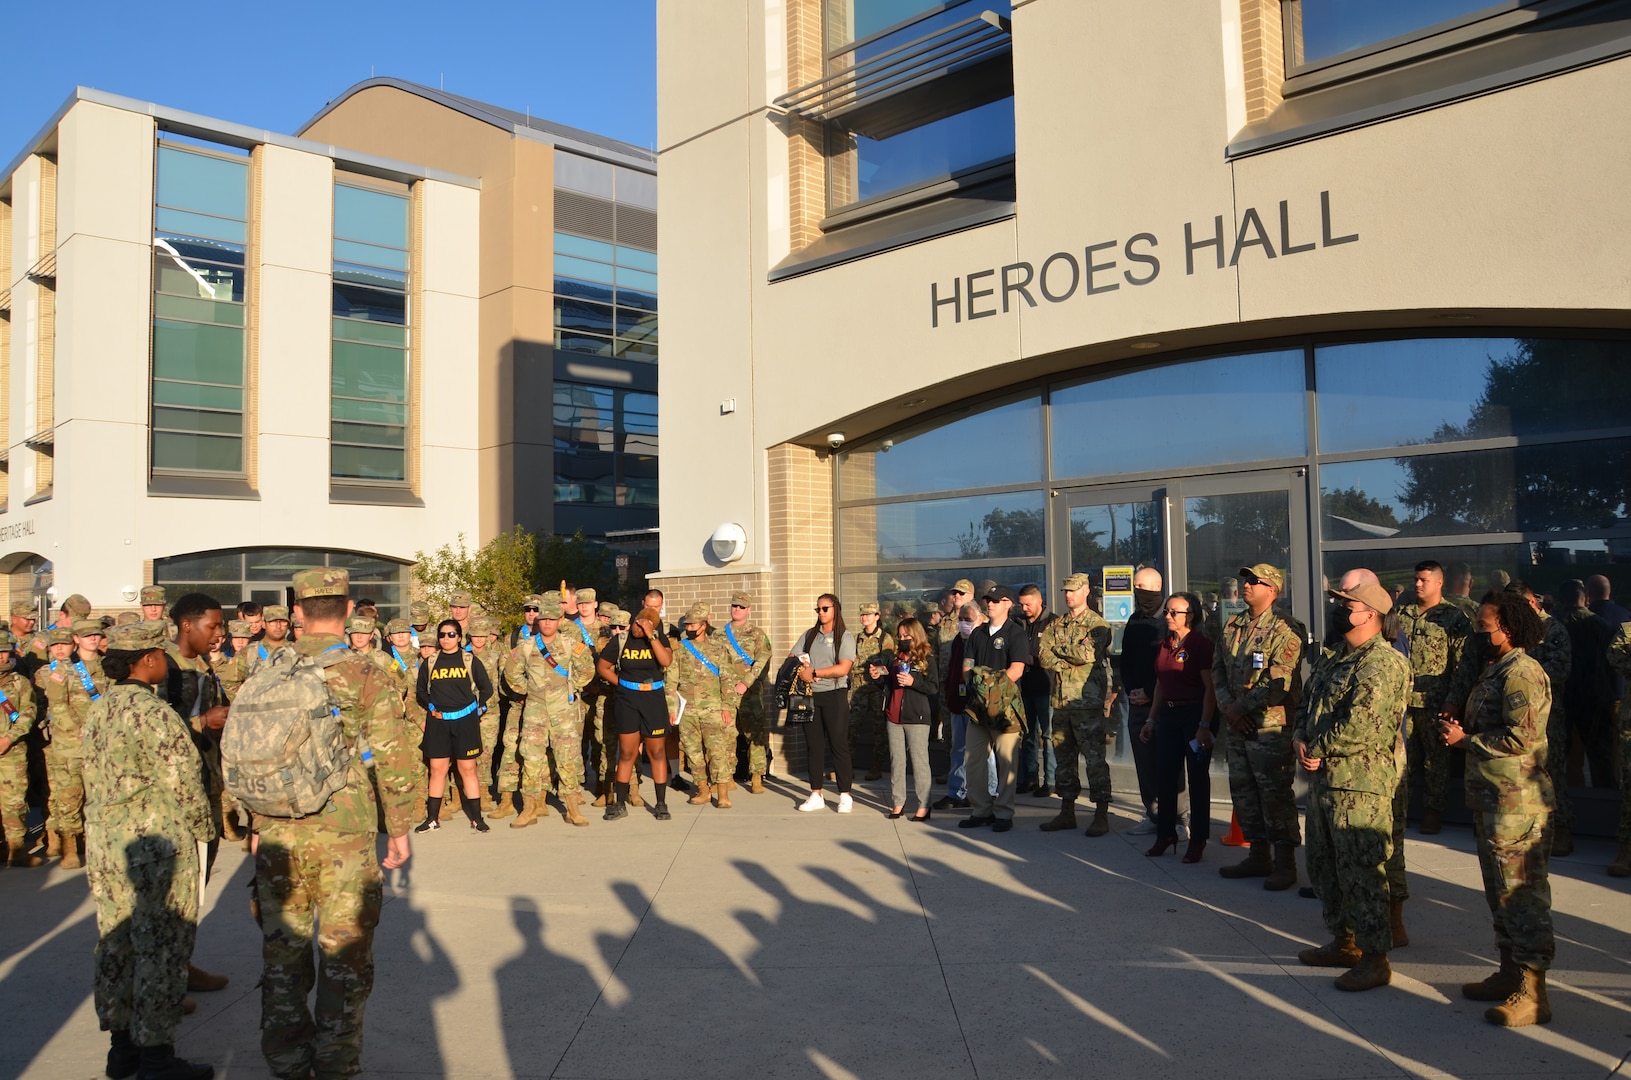 The Medical Education and Training Campus (METC) Radiologic Technologist program kicked off National Radiologic Technology Week November 8th with a reading of the Texas Governor’s Proclamation outside Heroes Hall, the medical instructional facility where the RAD program is located.